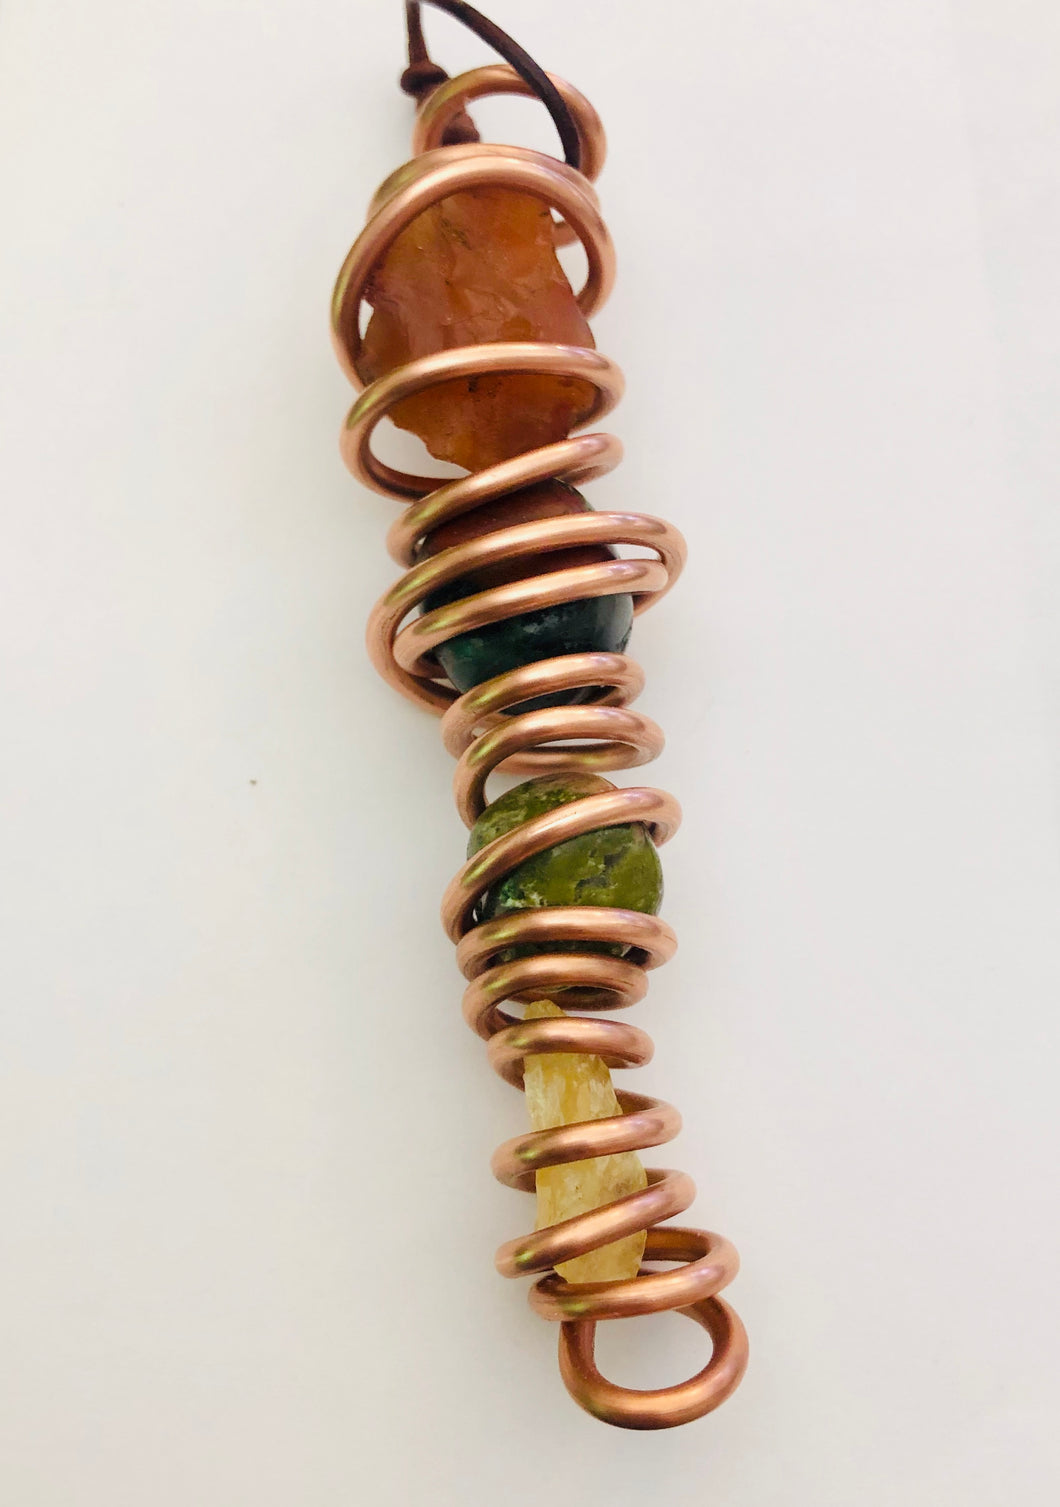 Intentionally made crystal / copper healing wand